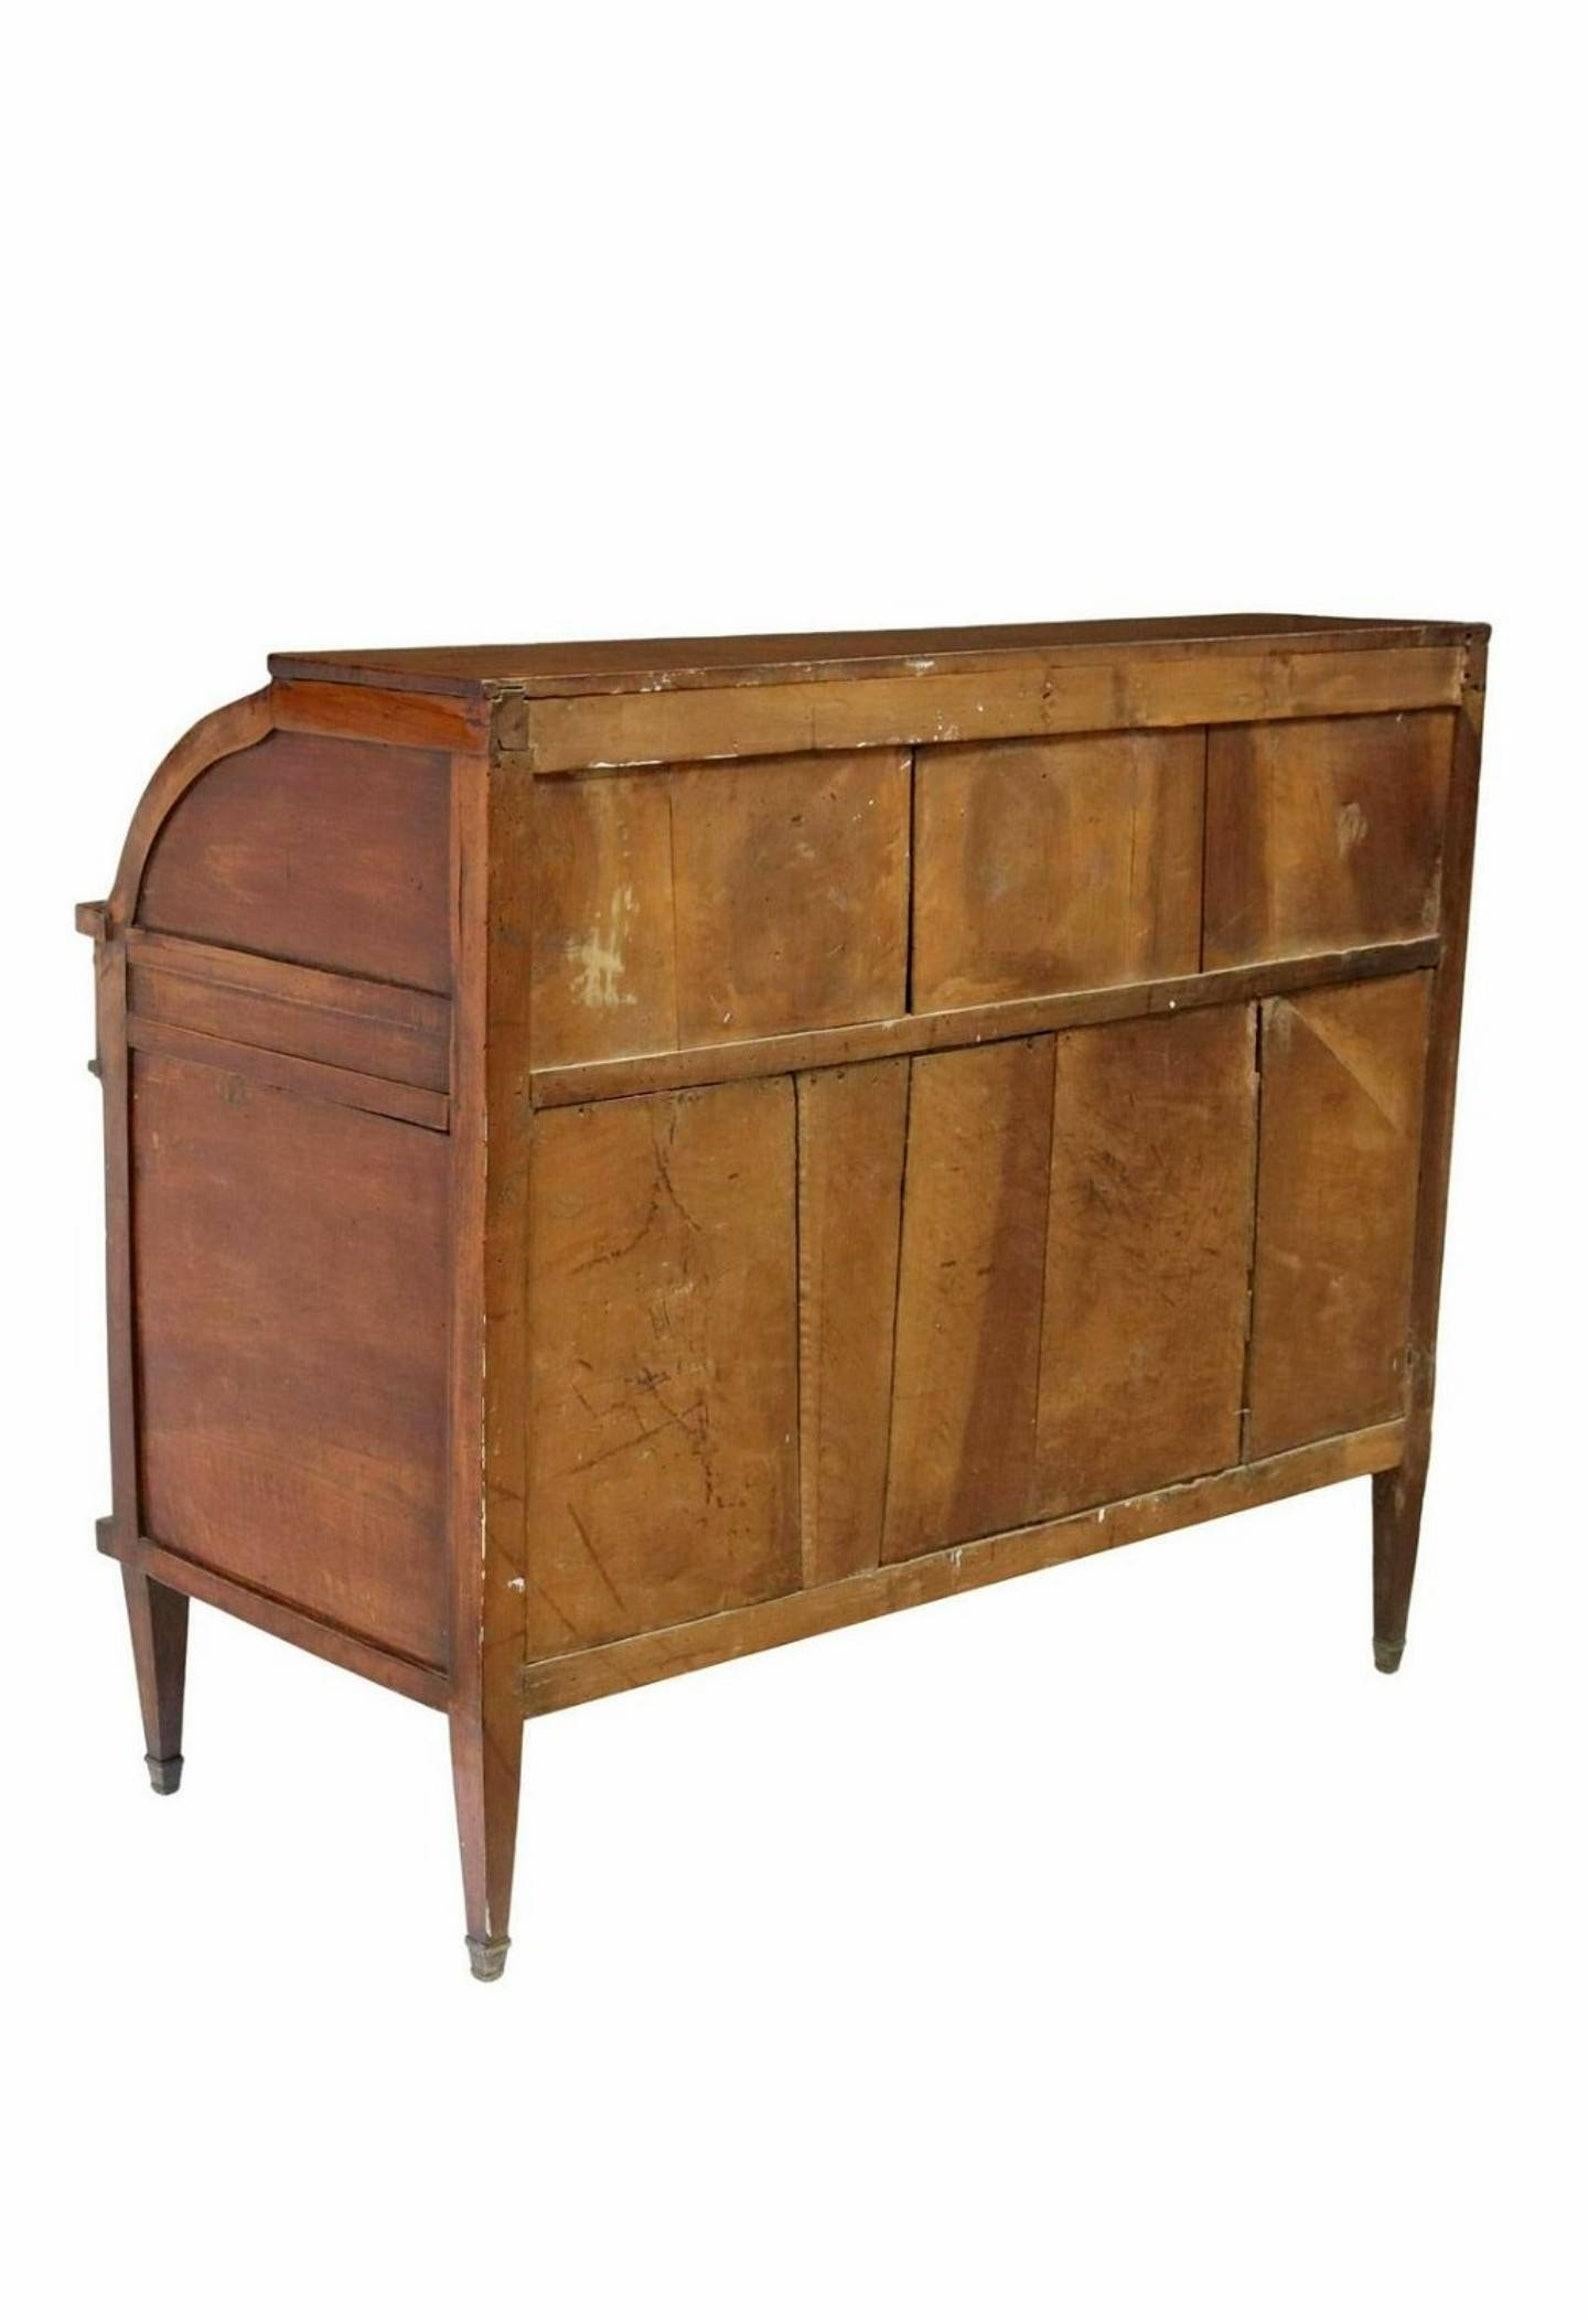 Early 19th Century French Empire Period Bureau a Cylindre Gentleman's Desk For Sale 5